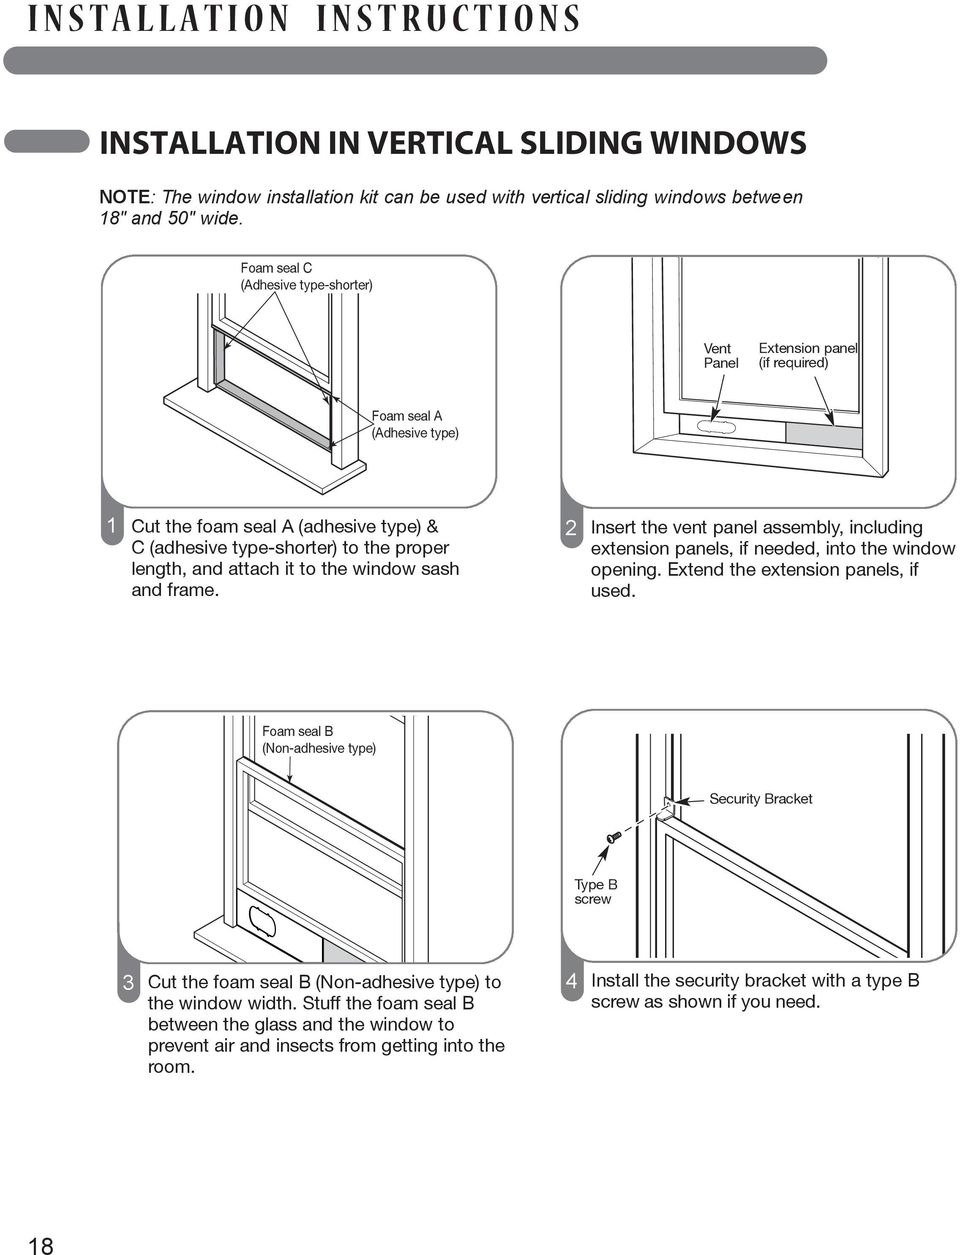 attach it to the window sash and frame. Tipo C de sellado con espuma (tipo adhesivo-más corto). 2 Insert the vent panel assembly, including extension panels, if needed, into the window opening.